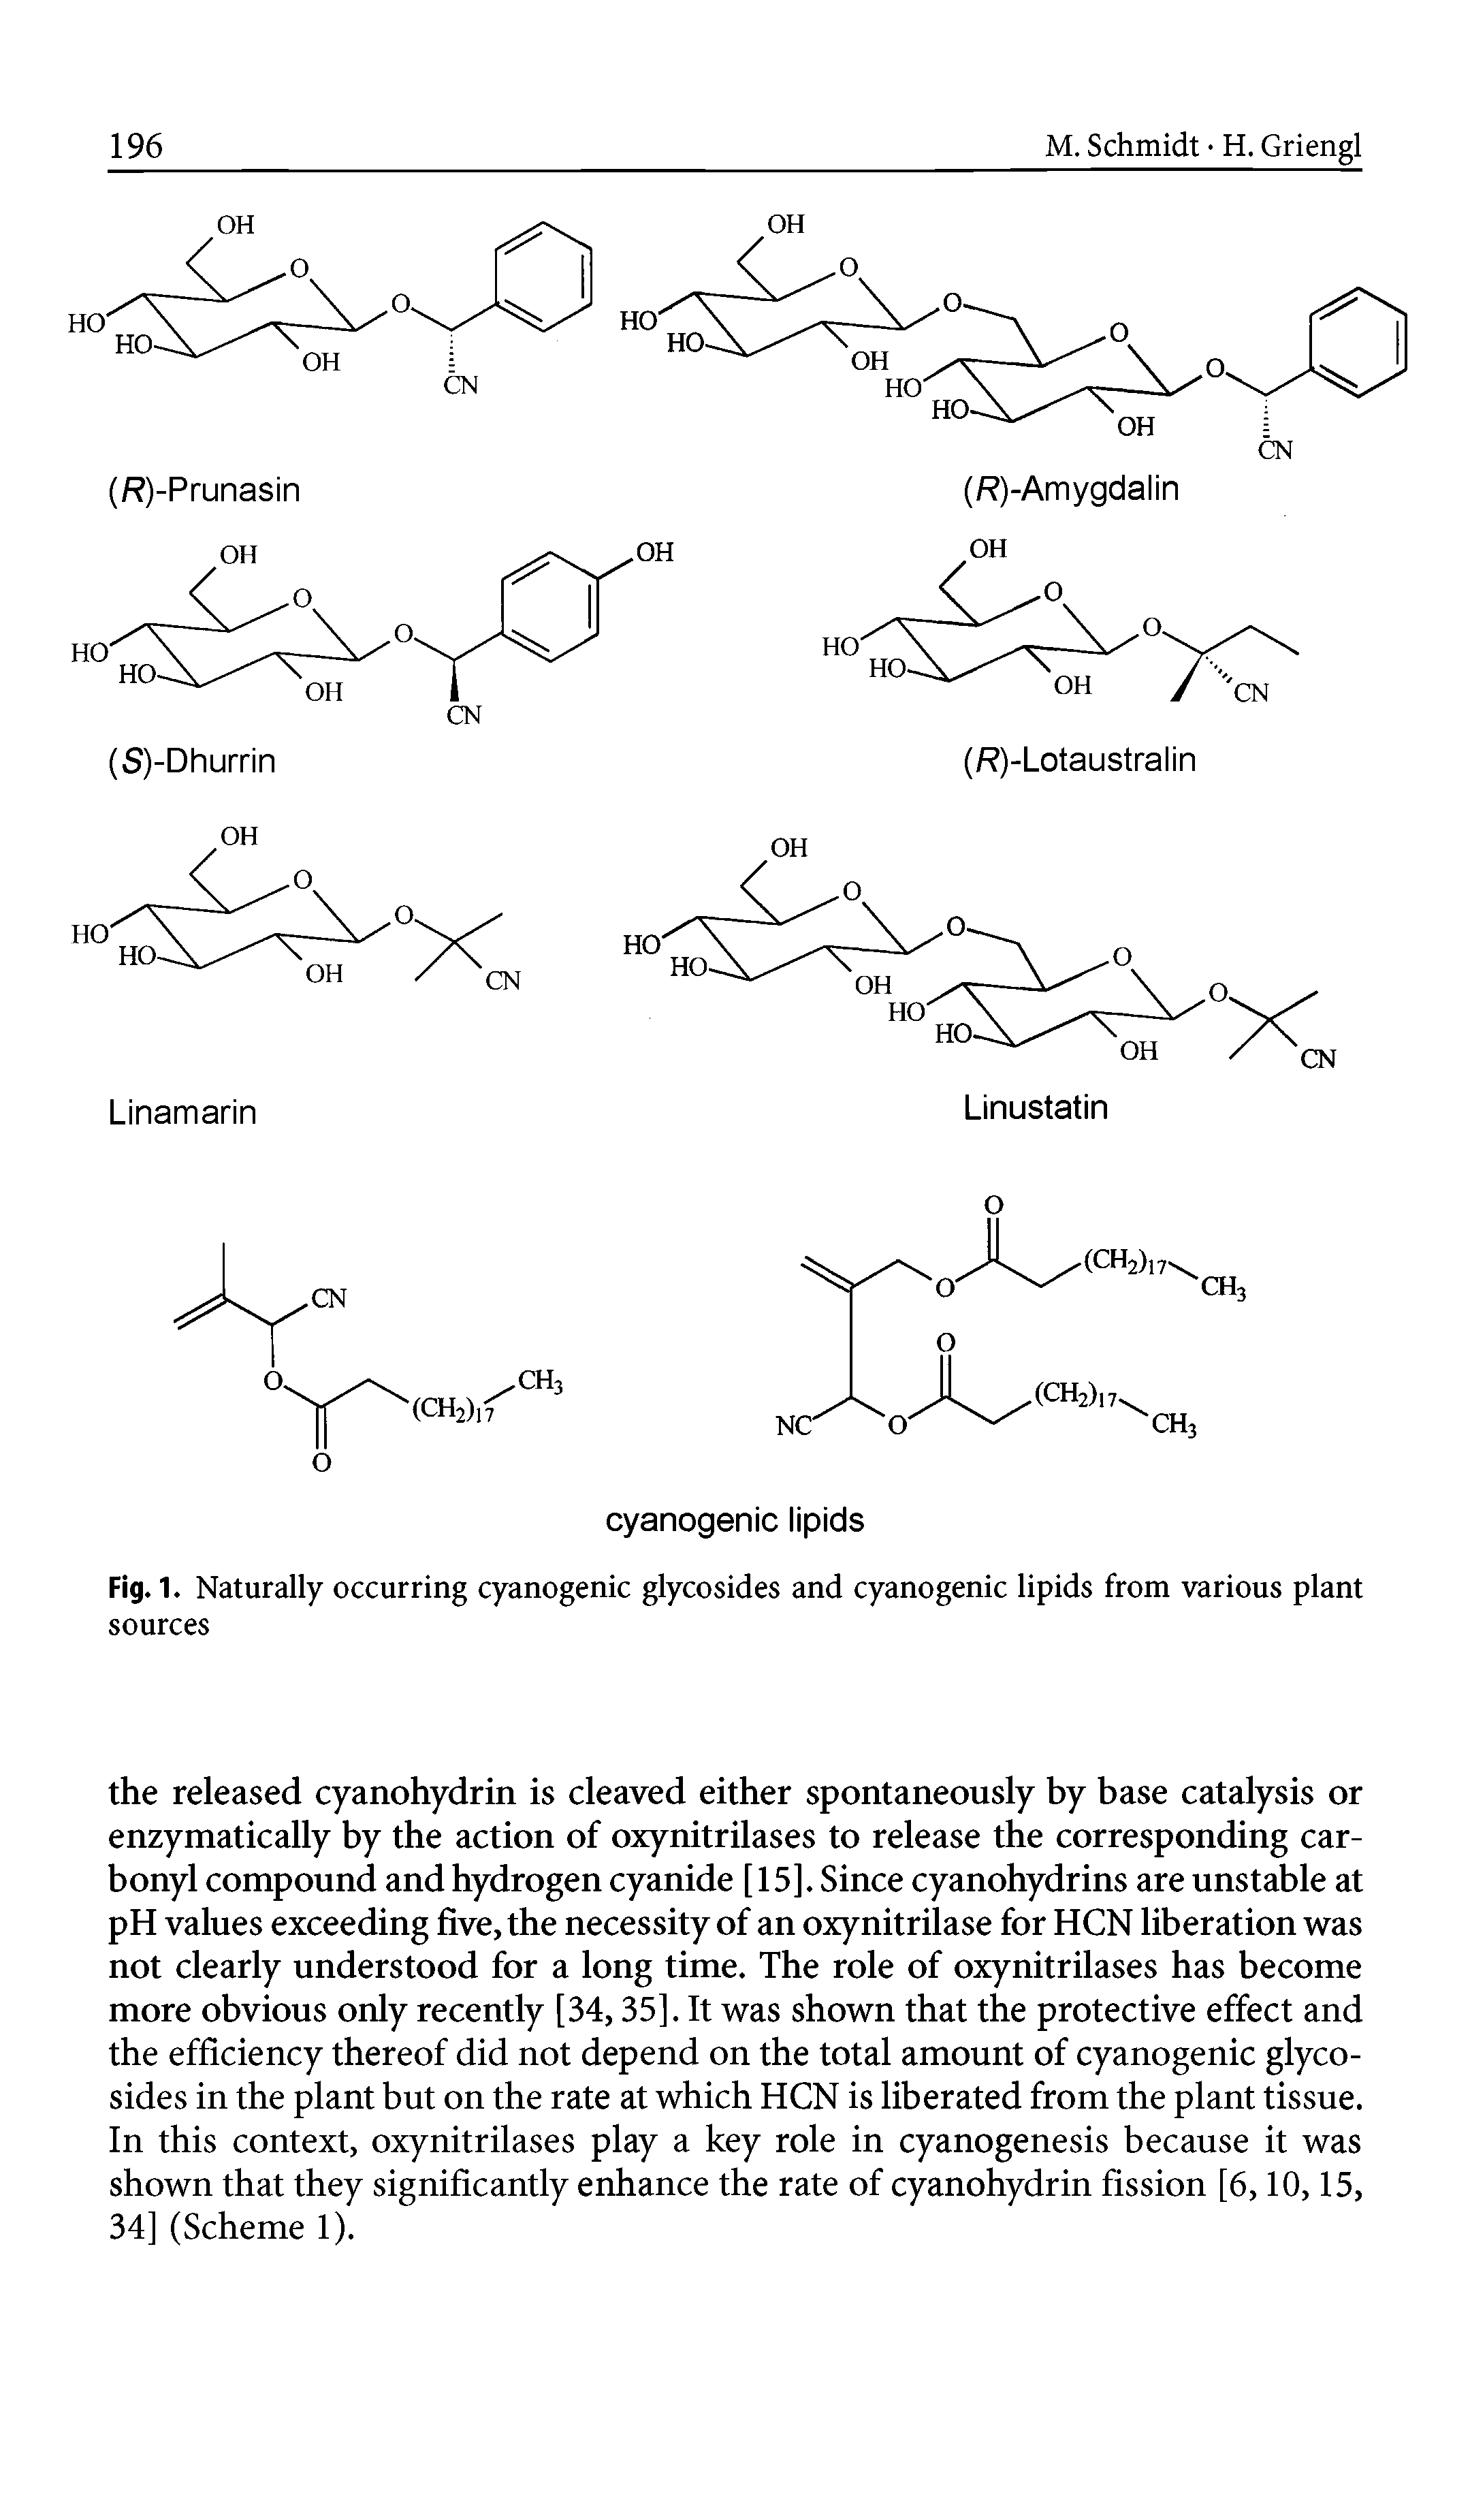 Fig. 1. Naturally occurring cyanogenic glycosides and cyanogenic lipids from various plant sources...